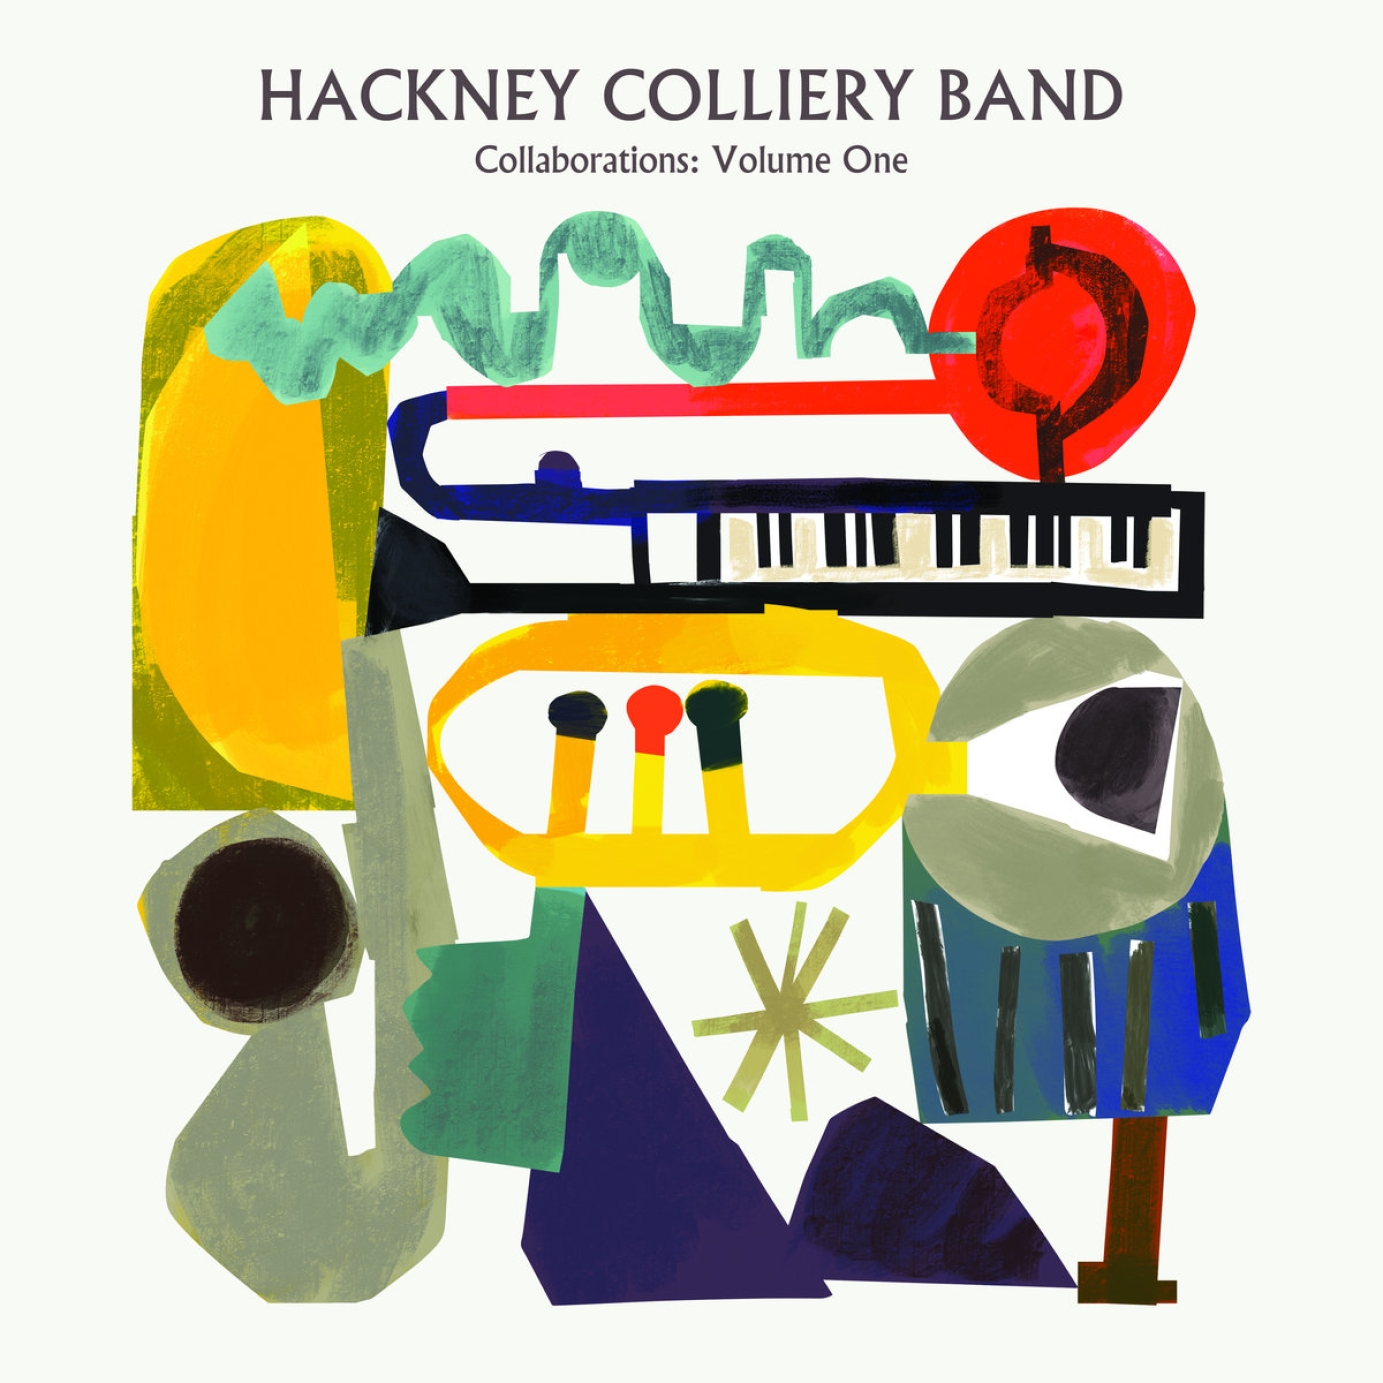 Artwork for Hackney Colliery Band by Nicolas Burrows